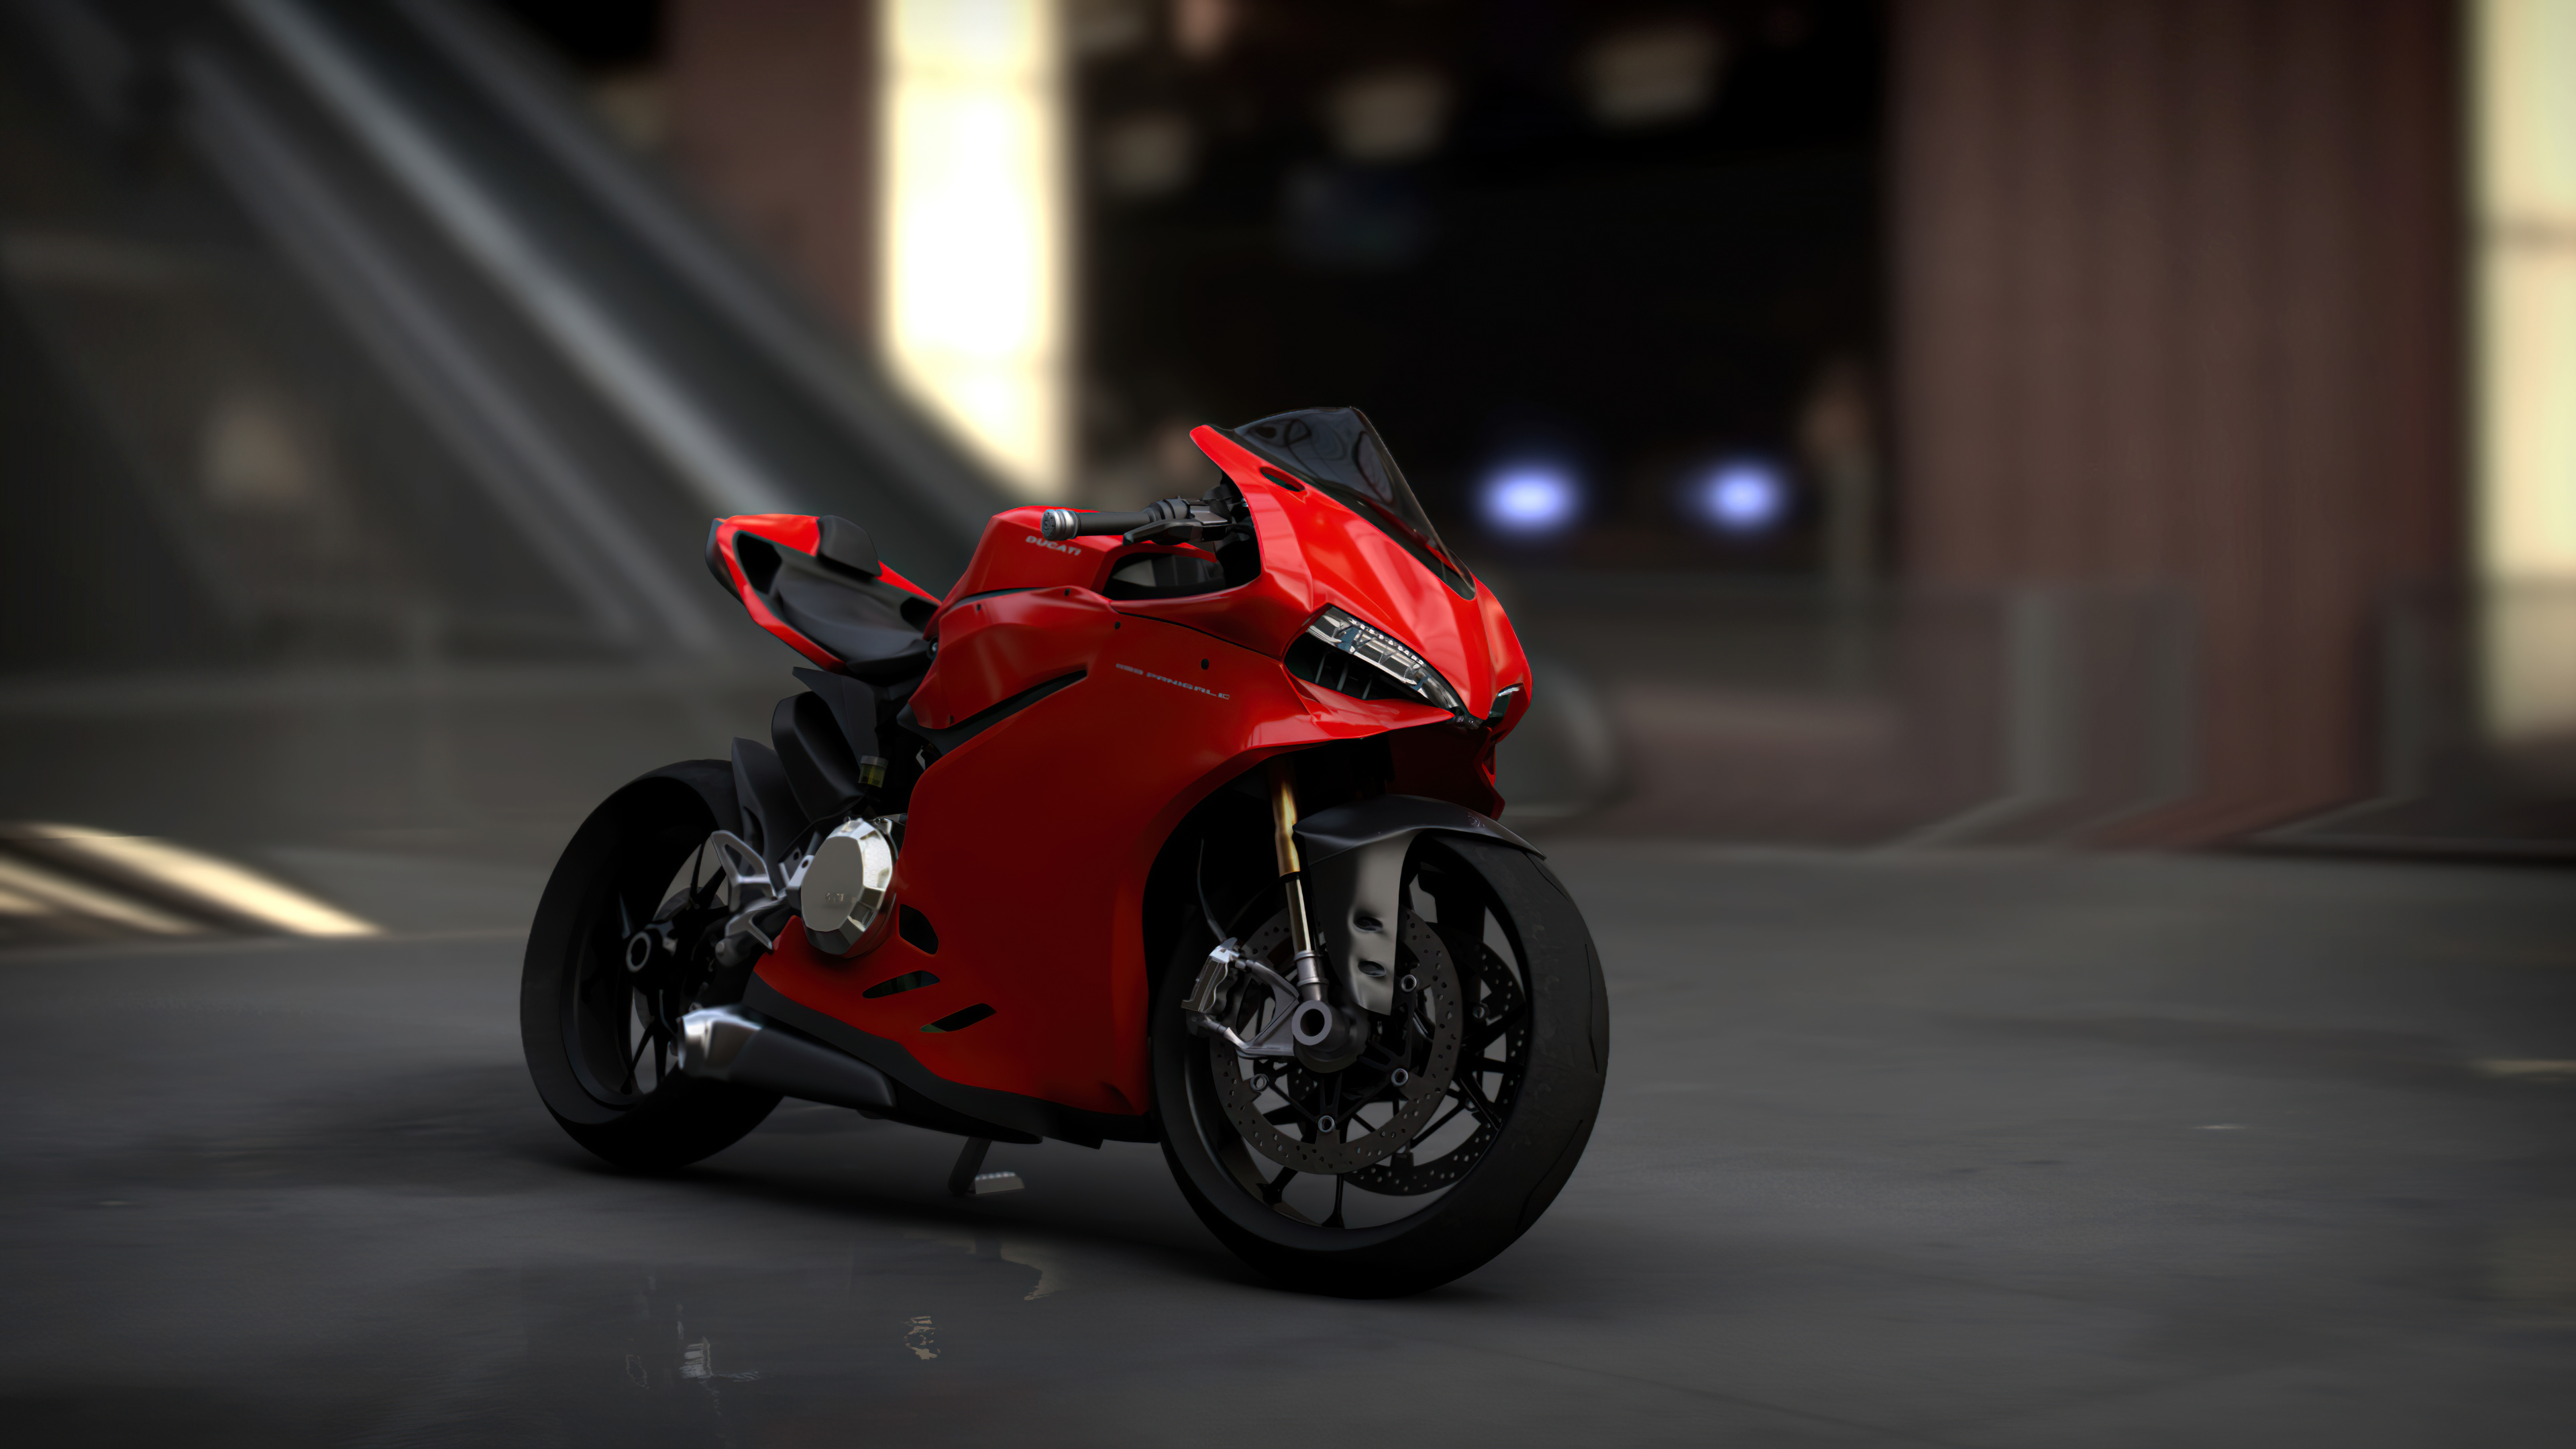 Ducati Panigale 1199 4k, HD Bikes, 4k Wallpapers, Images, Backgrounds,  Photos and Pictures